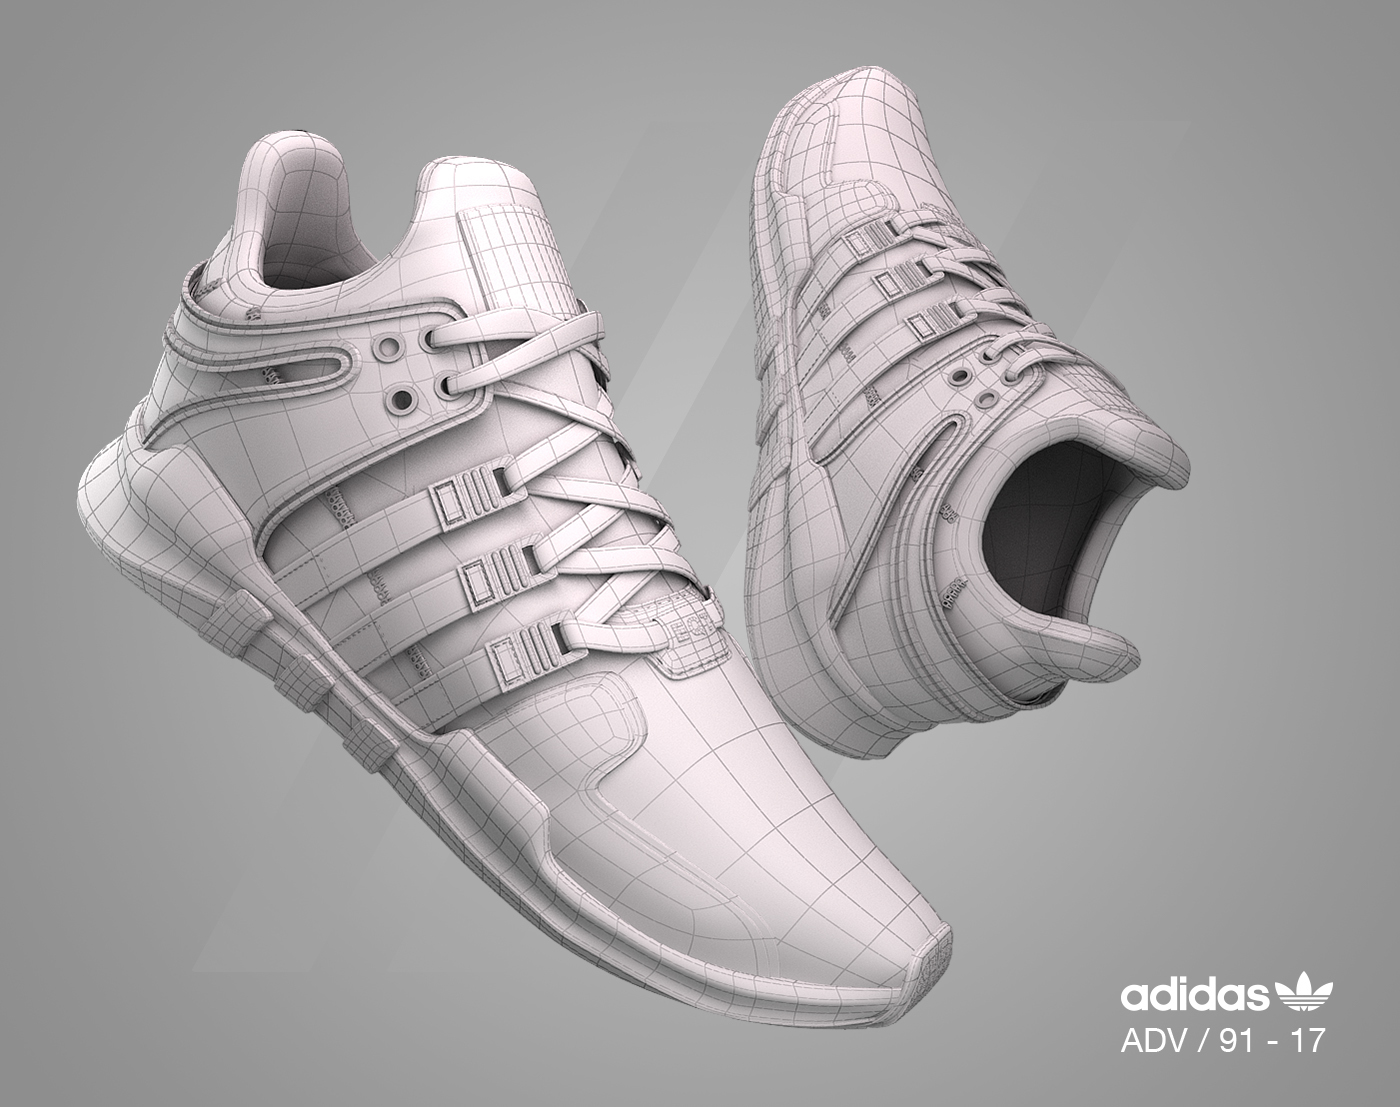 eqt adidas 3D vray MAX shoe shoes sport running sneakers